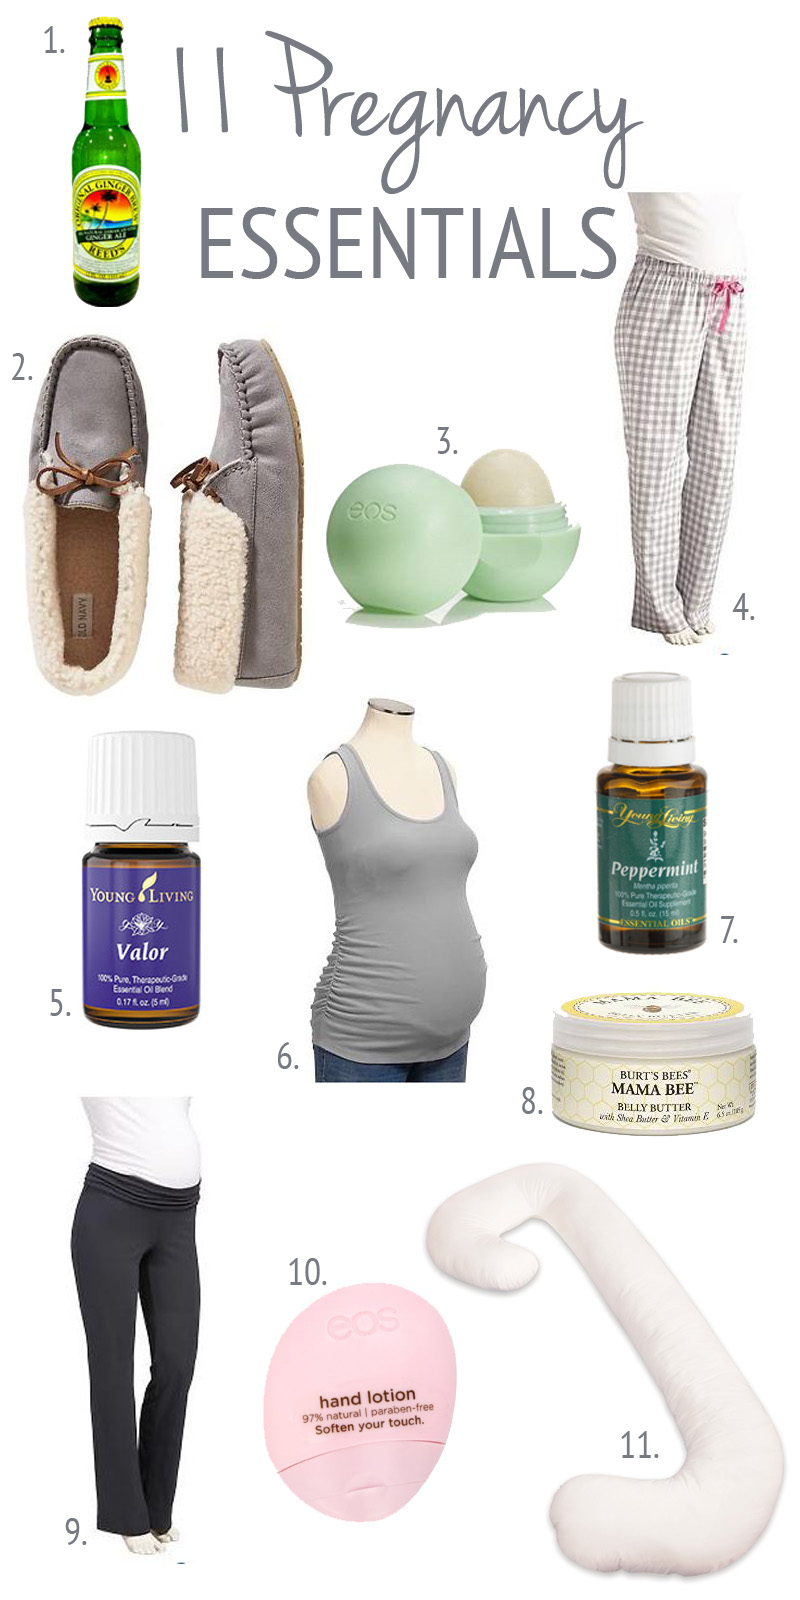 Our Natural Life: My Top 11 Pregnancy Essentials 